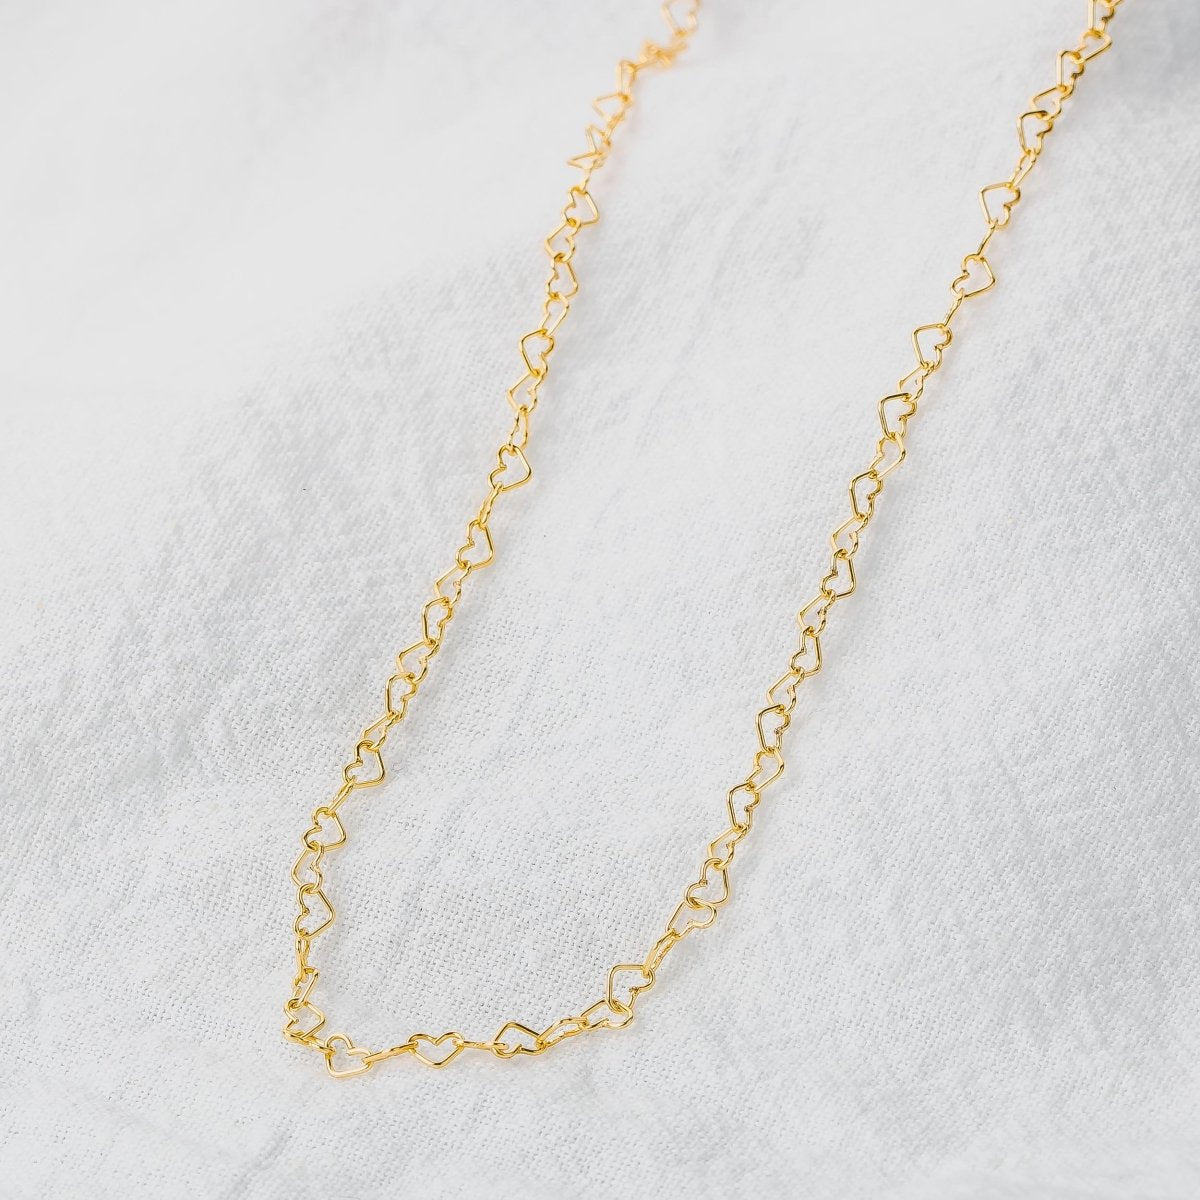 Heart Link Chain Necklace - Melanie Golden Jewelry - _badge_new, bridal, chain necklaces, essential chains, everyday essentials, for the bride, love, motherhood, necklaces, new, wedding